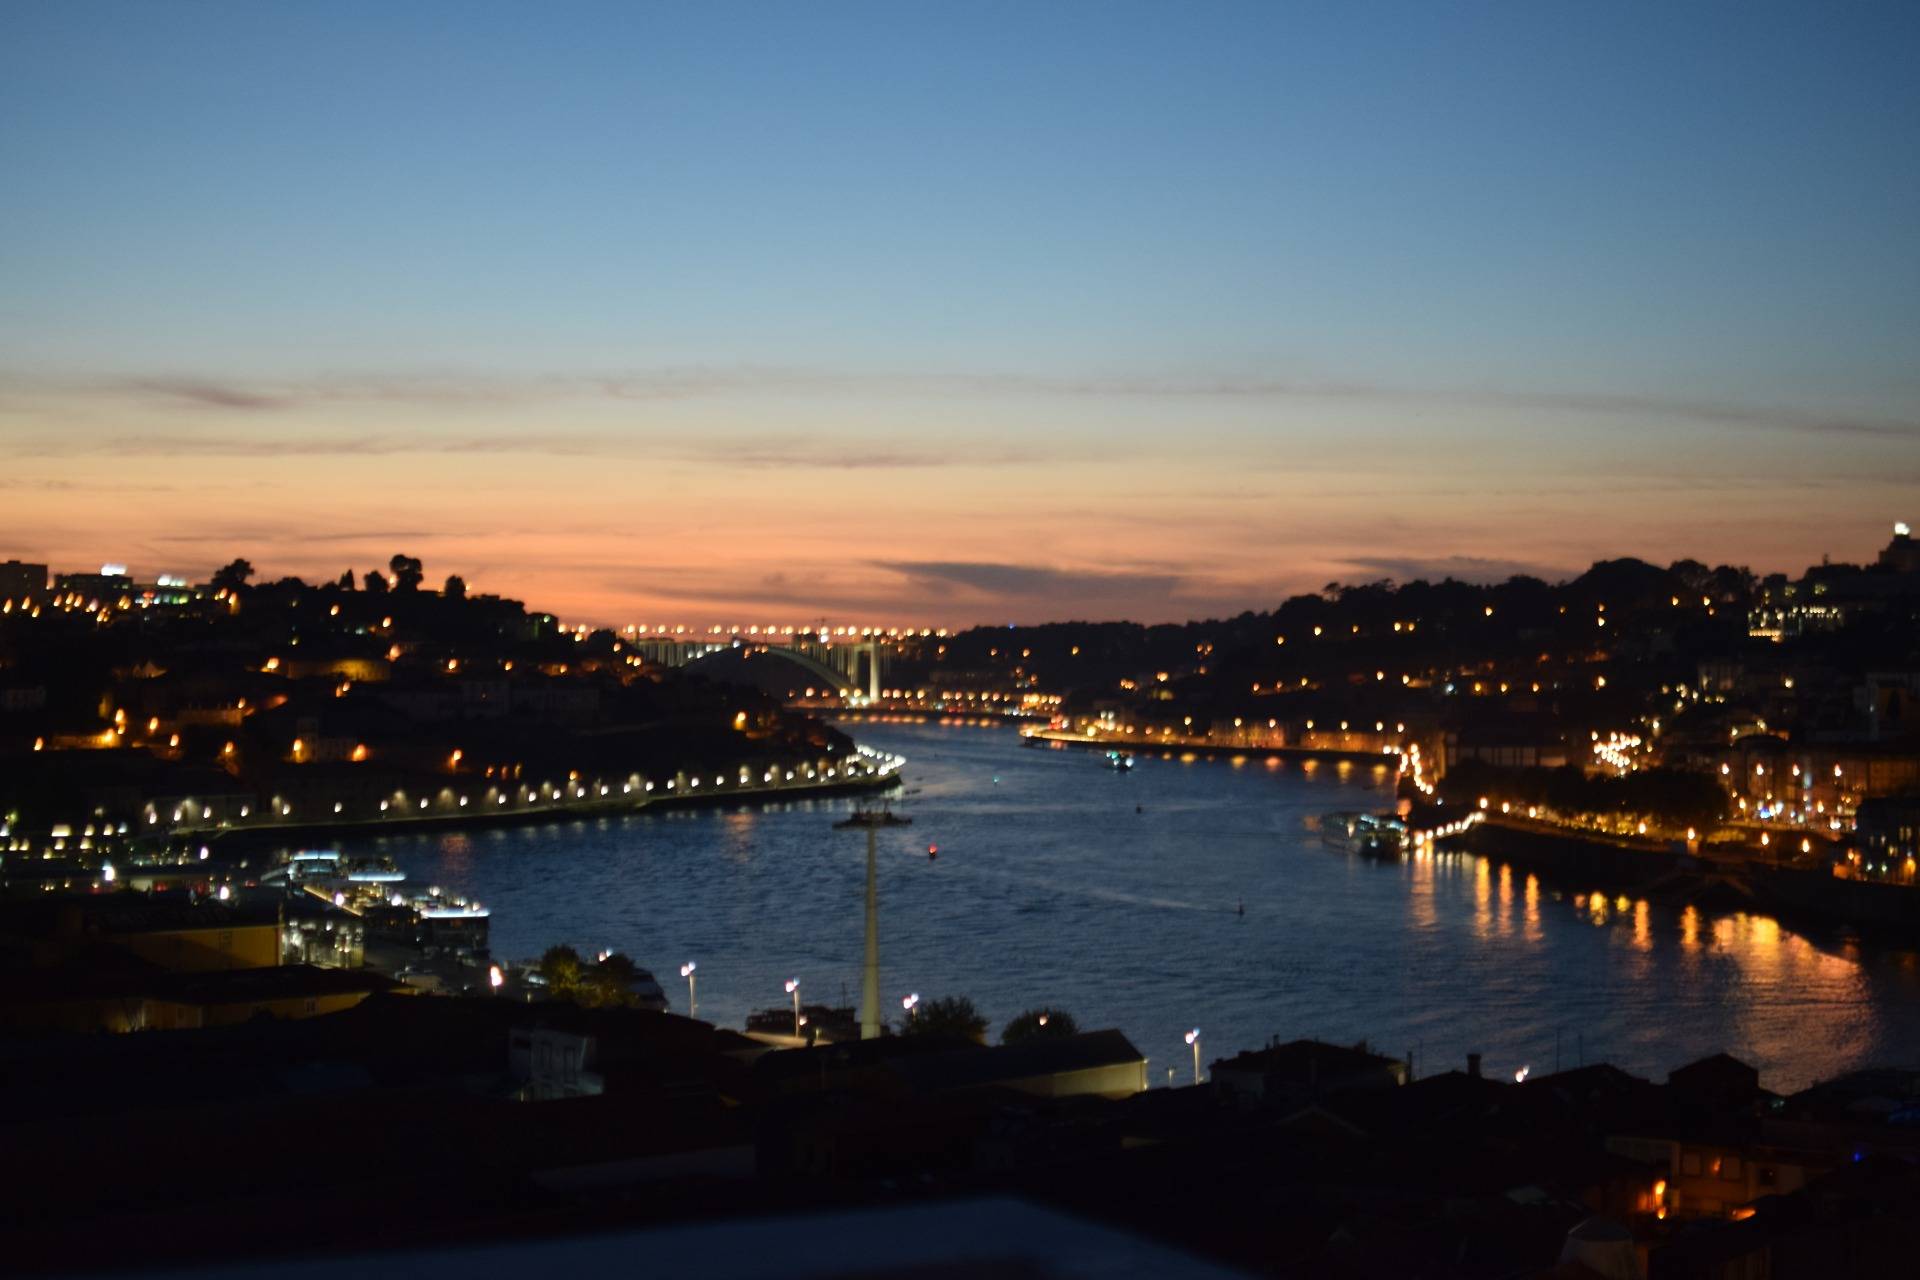 Watching Porto come alive at night